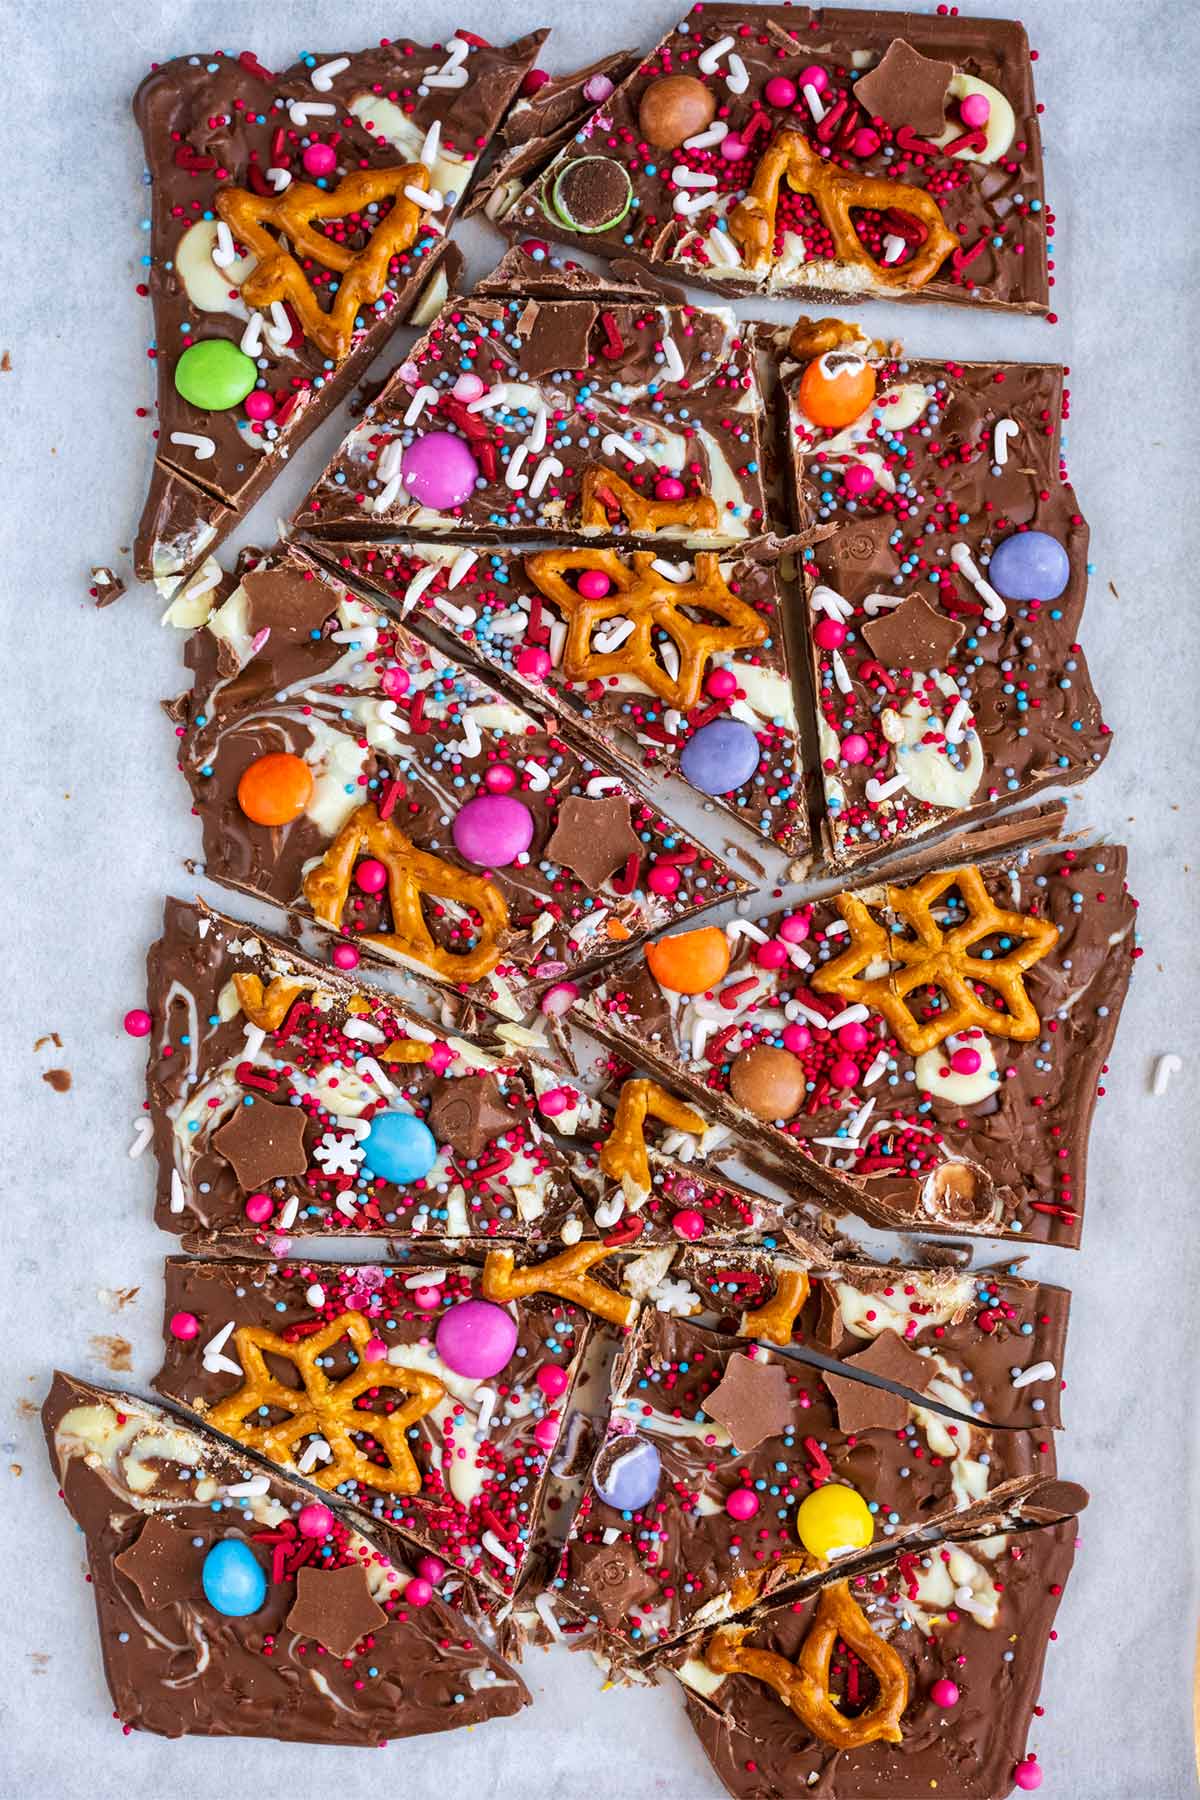 A slab of decorated chocolate cut into shards.